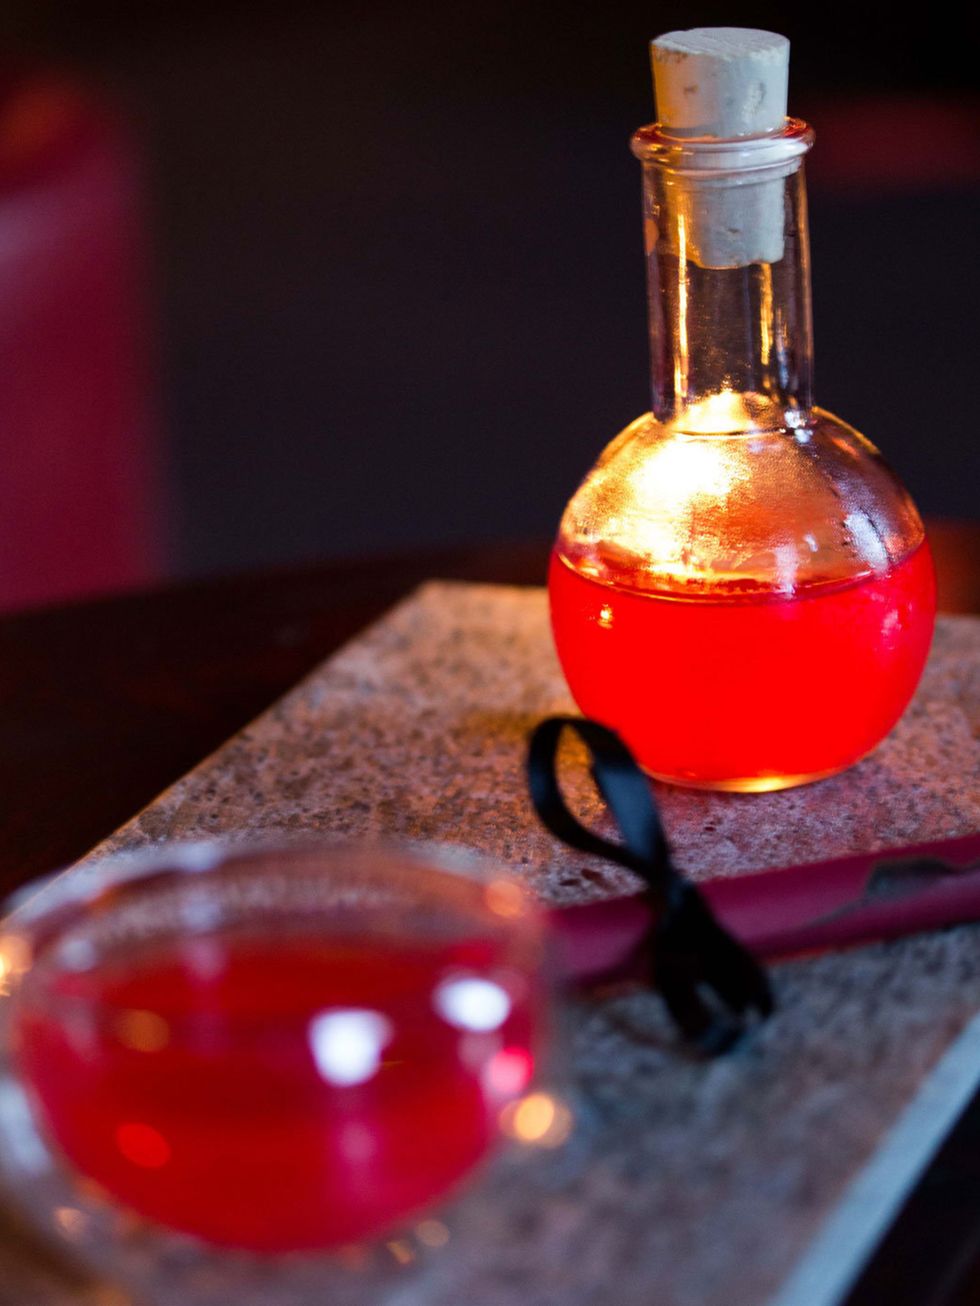 &lt;p&gt;&lt;strong&gt;Date Night: Love Potions at Bam-Bou&lt;/strong&gt;&lt;/p&gt;&lt;p&gt;Save the date: this Saturday, 1 February, Asian fusion restaurant Bam-Bou will be launching its new selection of cocktails, entitled Love Potions.&lt;/p&gt;&lt;p&g